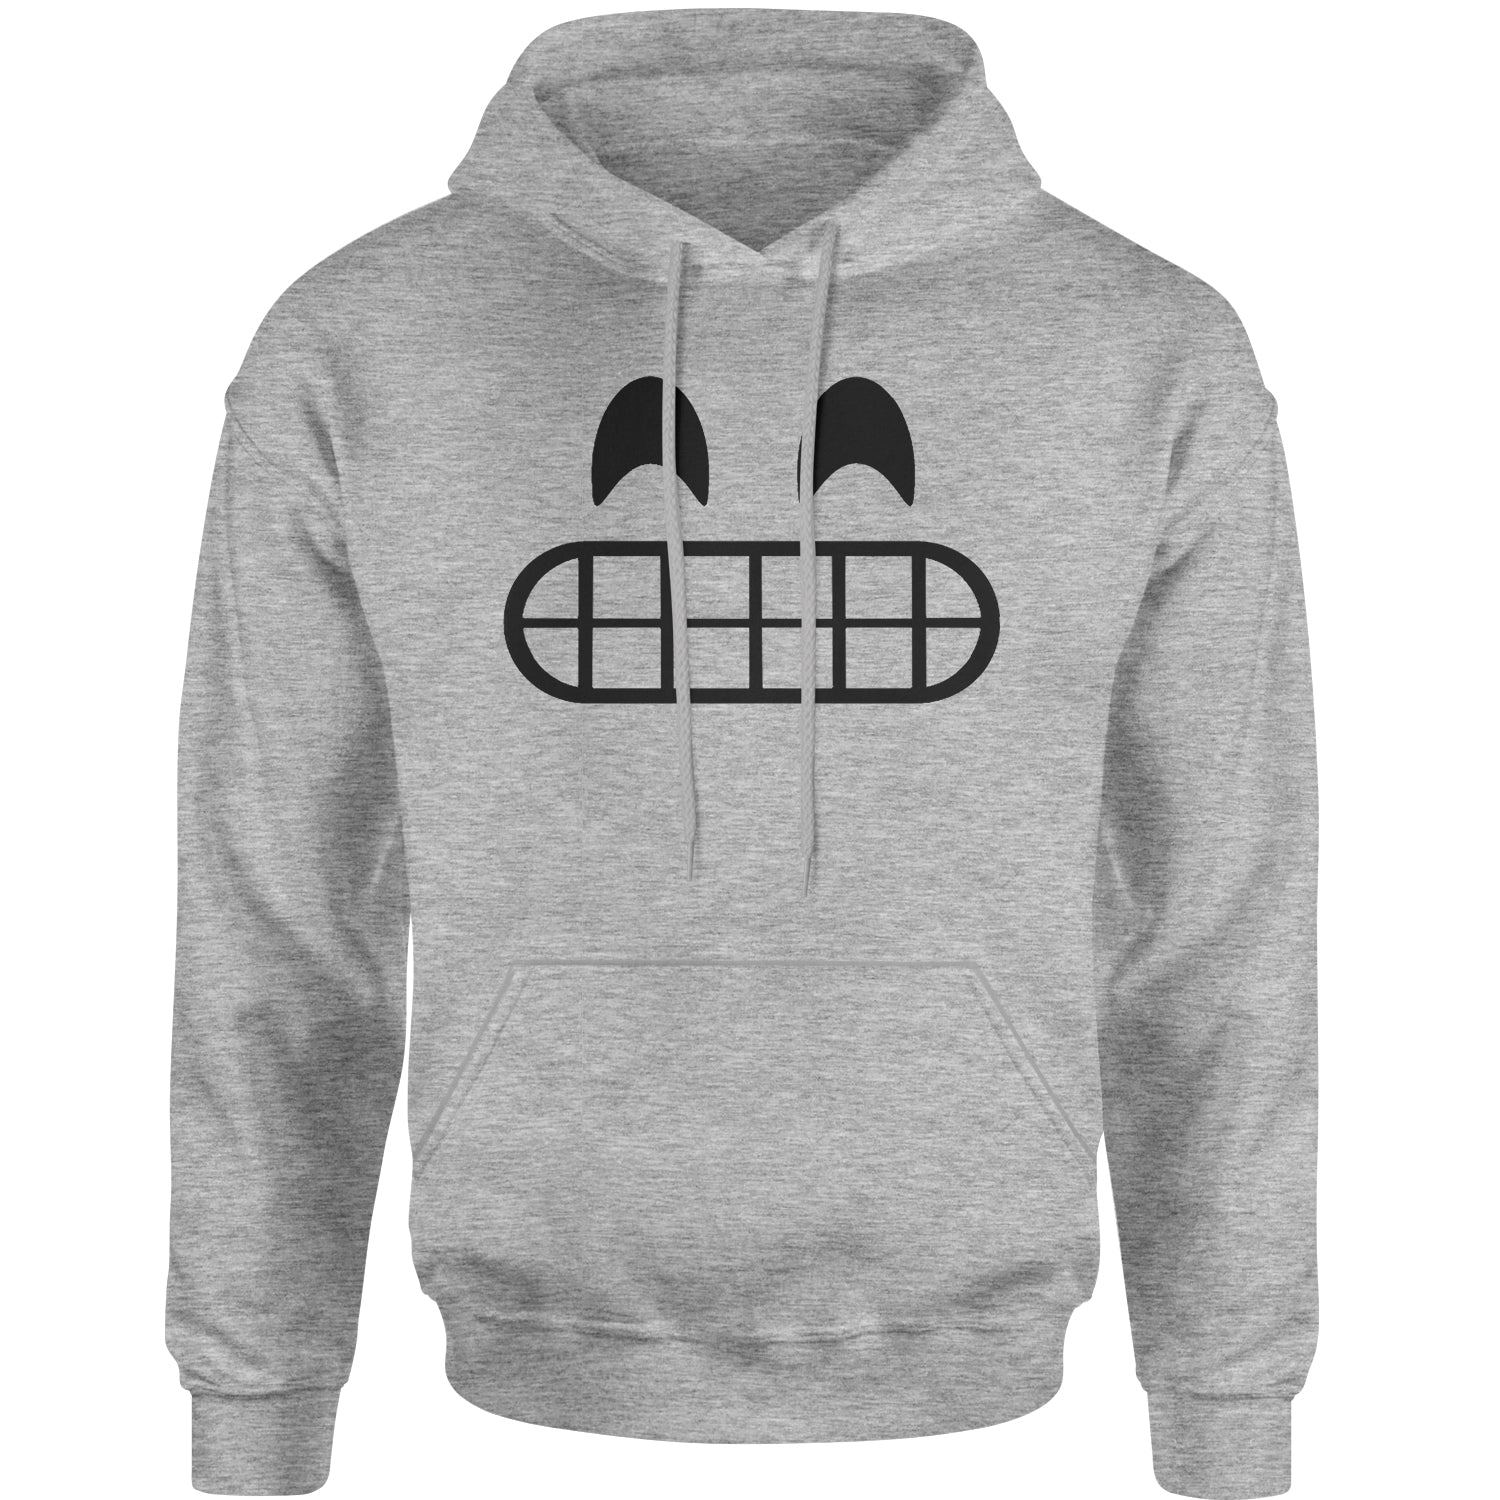 Emoticon Grinning Smile Face Adult Hoodie Sweatshirt cosplay, costume, dress, emoji, emote, face, halloween, smiley, up, yellow by Expression Tees